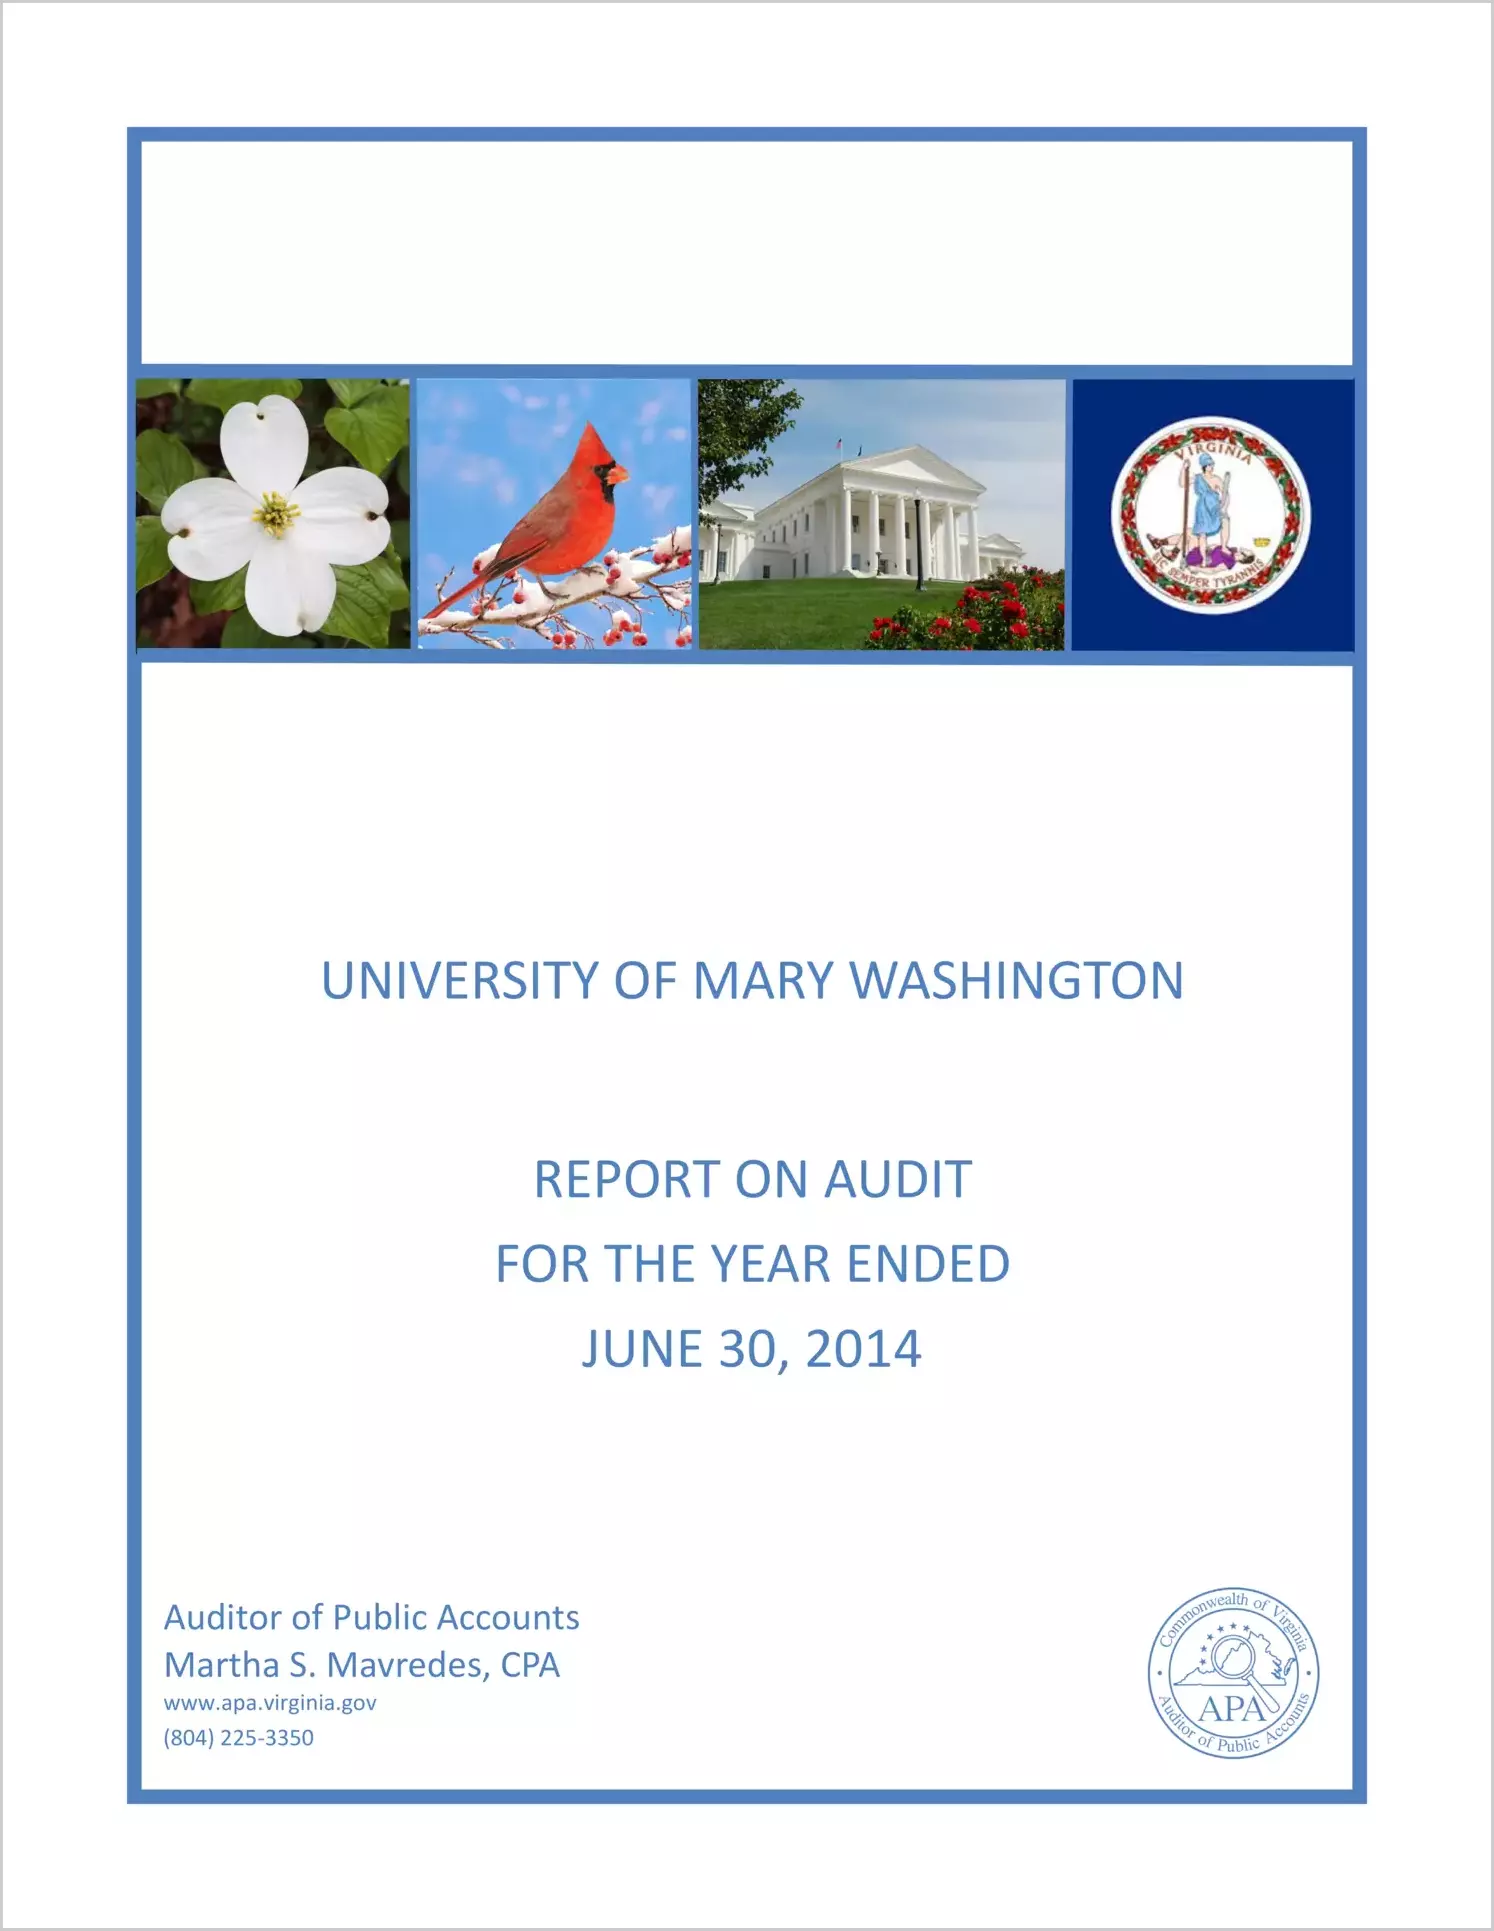 University of Mary Washington for the year ended June 30, 2014